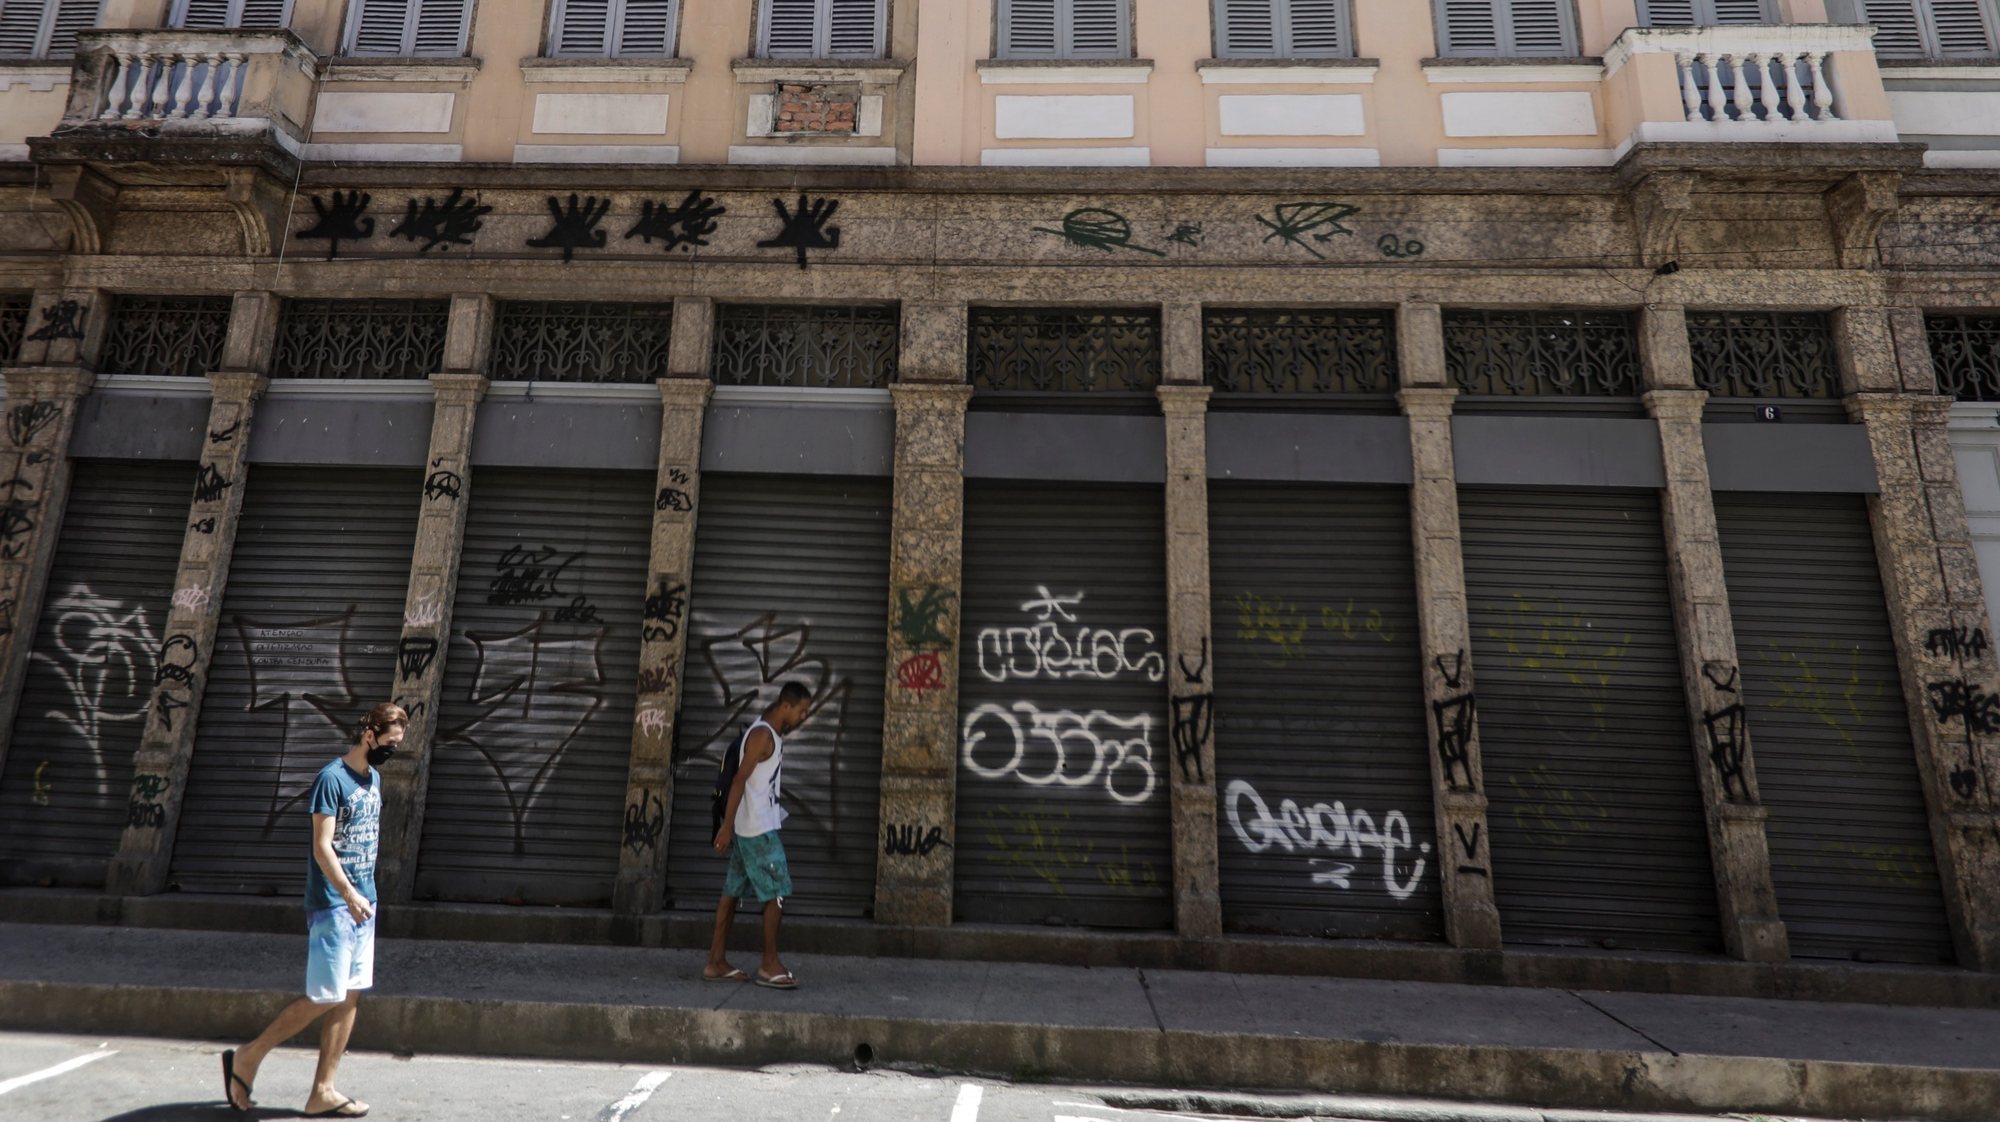 epa09048914 Several business premises closed due to the pandemic crisis, in Rio de Janeiro, Brazil, 03 March 2021. The Brazilian economy contracted by 4.1% in 2020, its worst performance in the last 25 years, affected by the covid-19 pandemic, which paralyzed activities for a few months and reduced consumption by 5.5%, reported this Wednesday the Government. Although the drop was less than that projected by the Government and economists, it is the largest retraction suffered by Brazil in the last 25 years since, in 1996, the indicator began to be measured with the current criteria, and exceeded the 3.5% decline in 2015, when the country faced its biggest recession in decades.  EPA/Antonio Lacerda